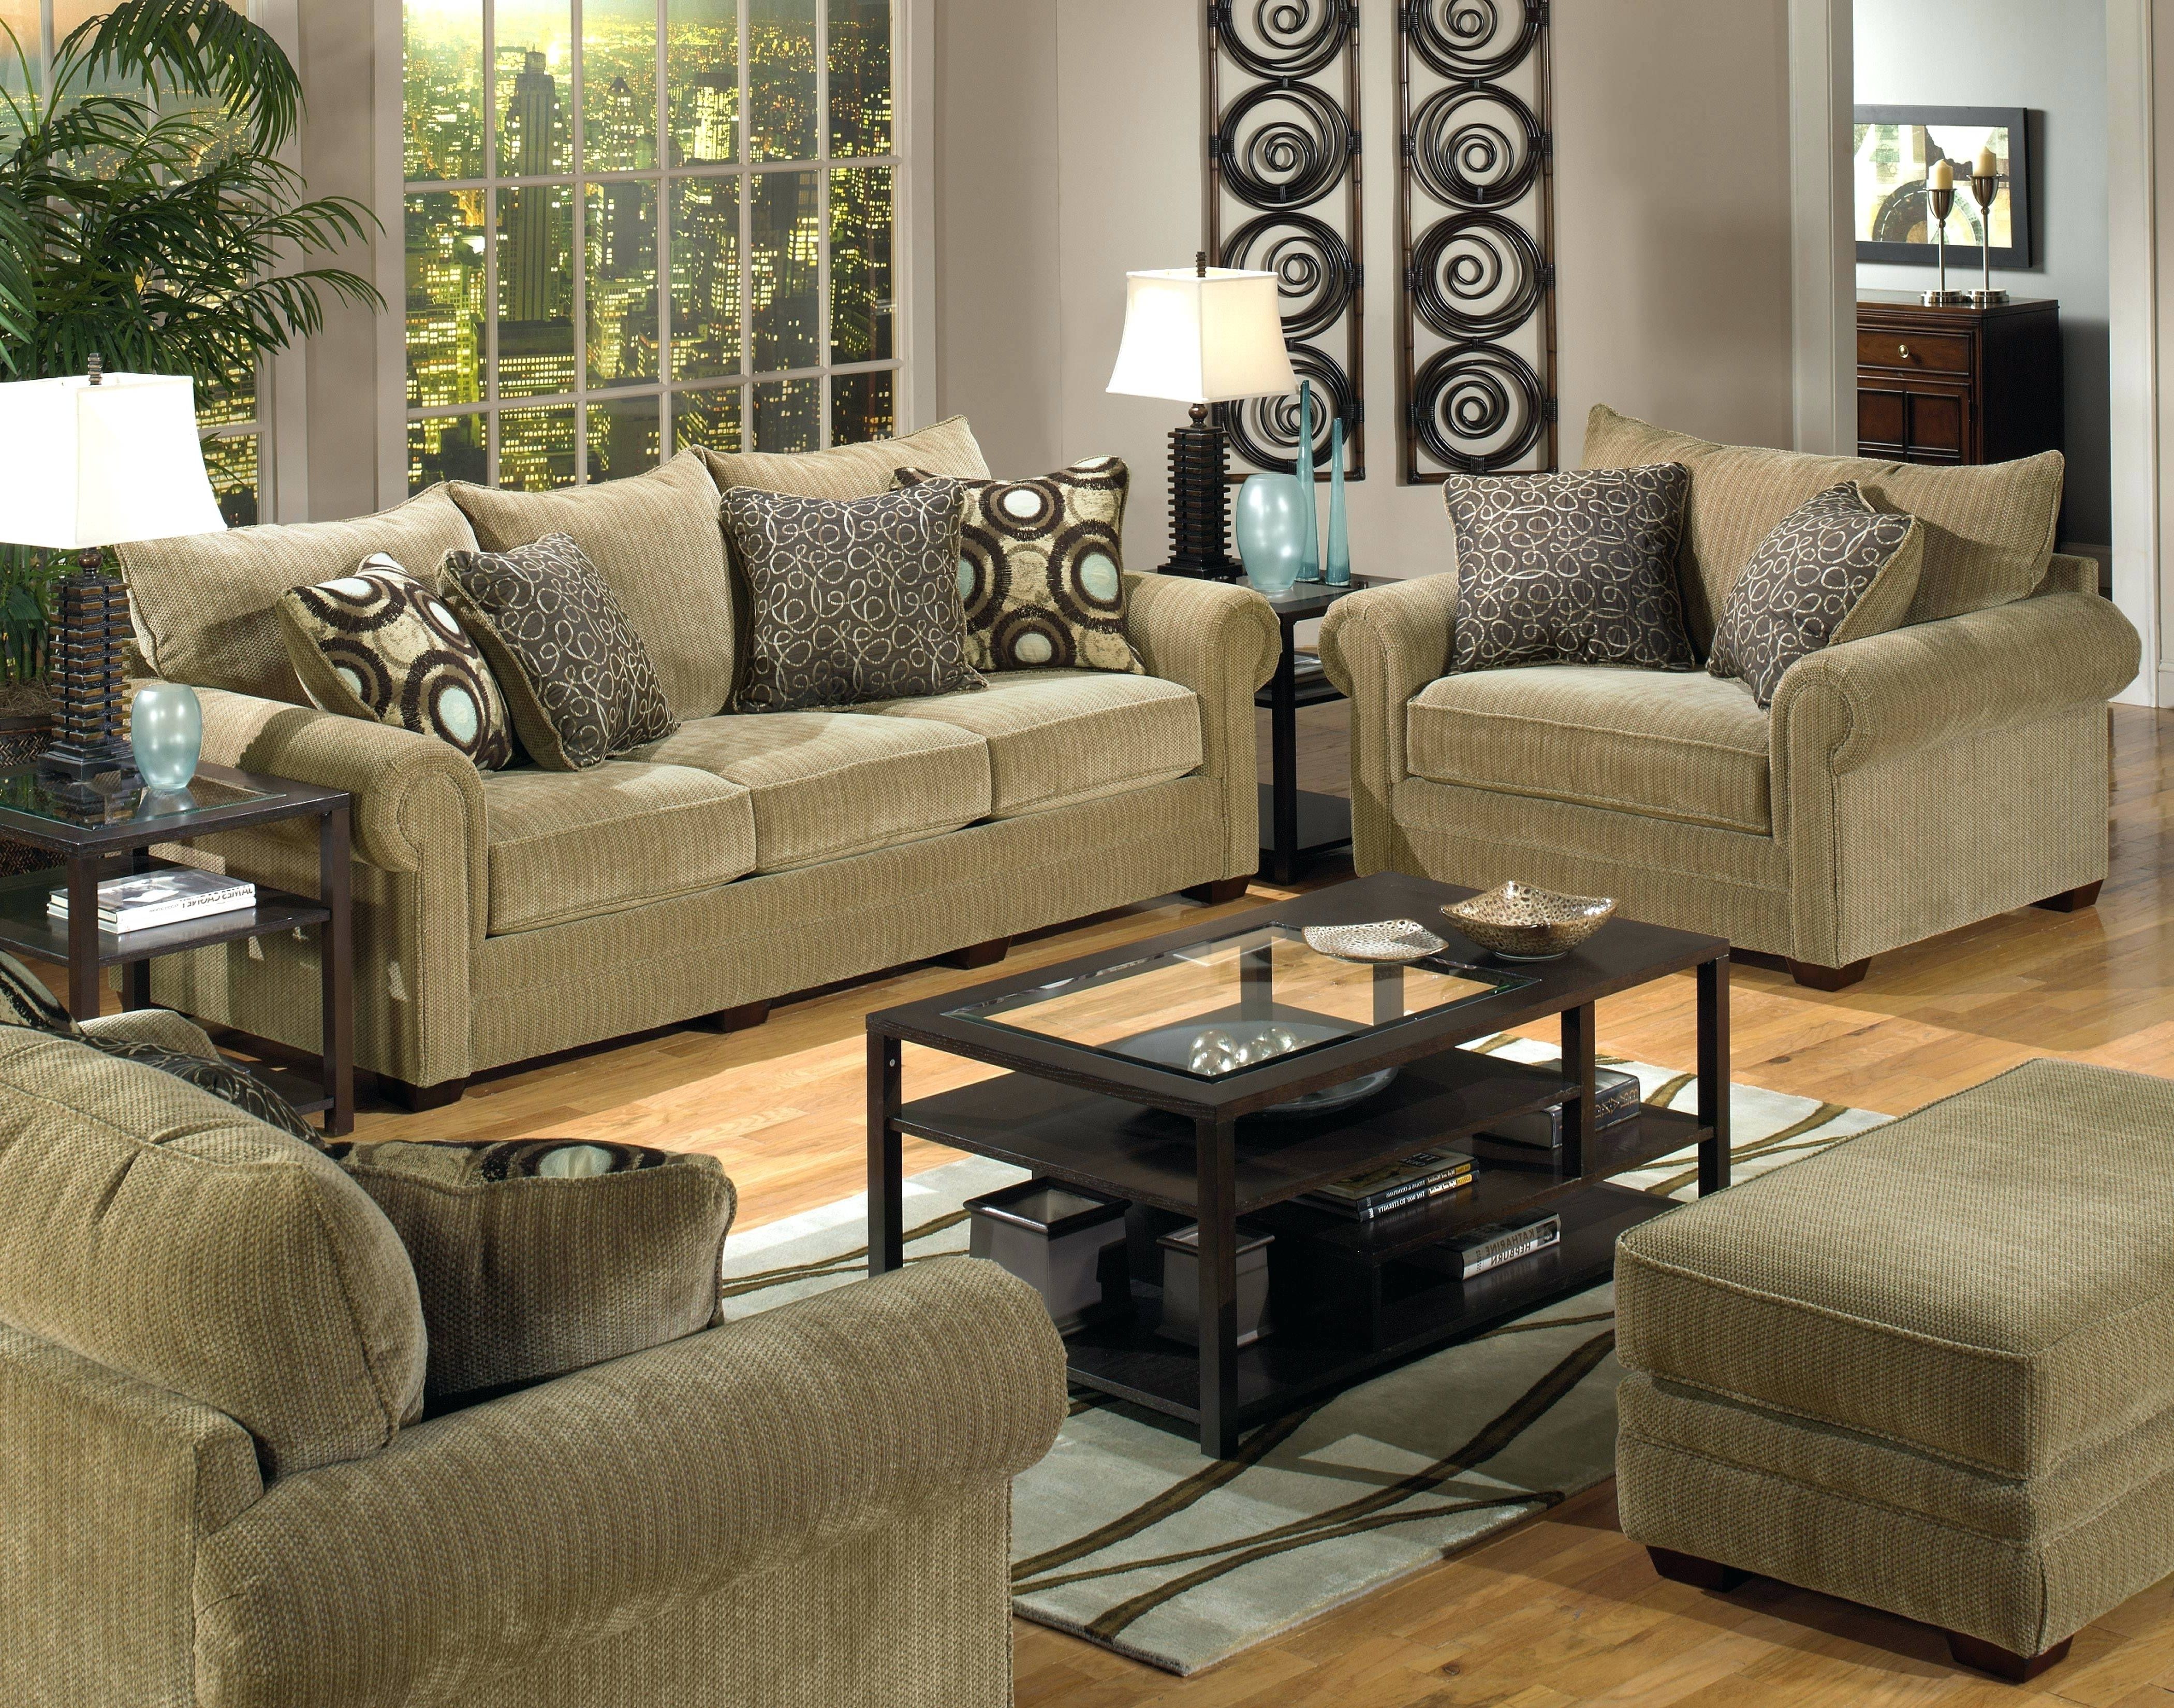 Newest Cream Colored Sofas In Cream Colored Sofa Throw Pillows Covers Microfiber (View 9 of 15)